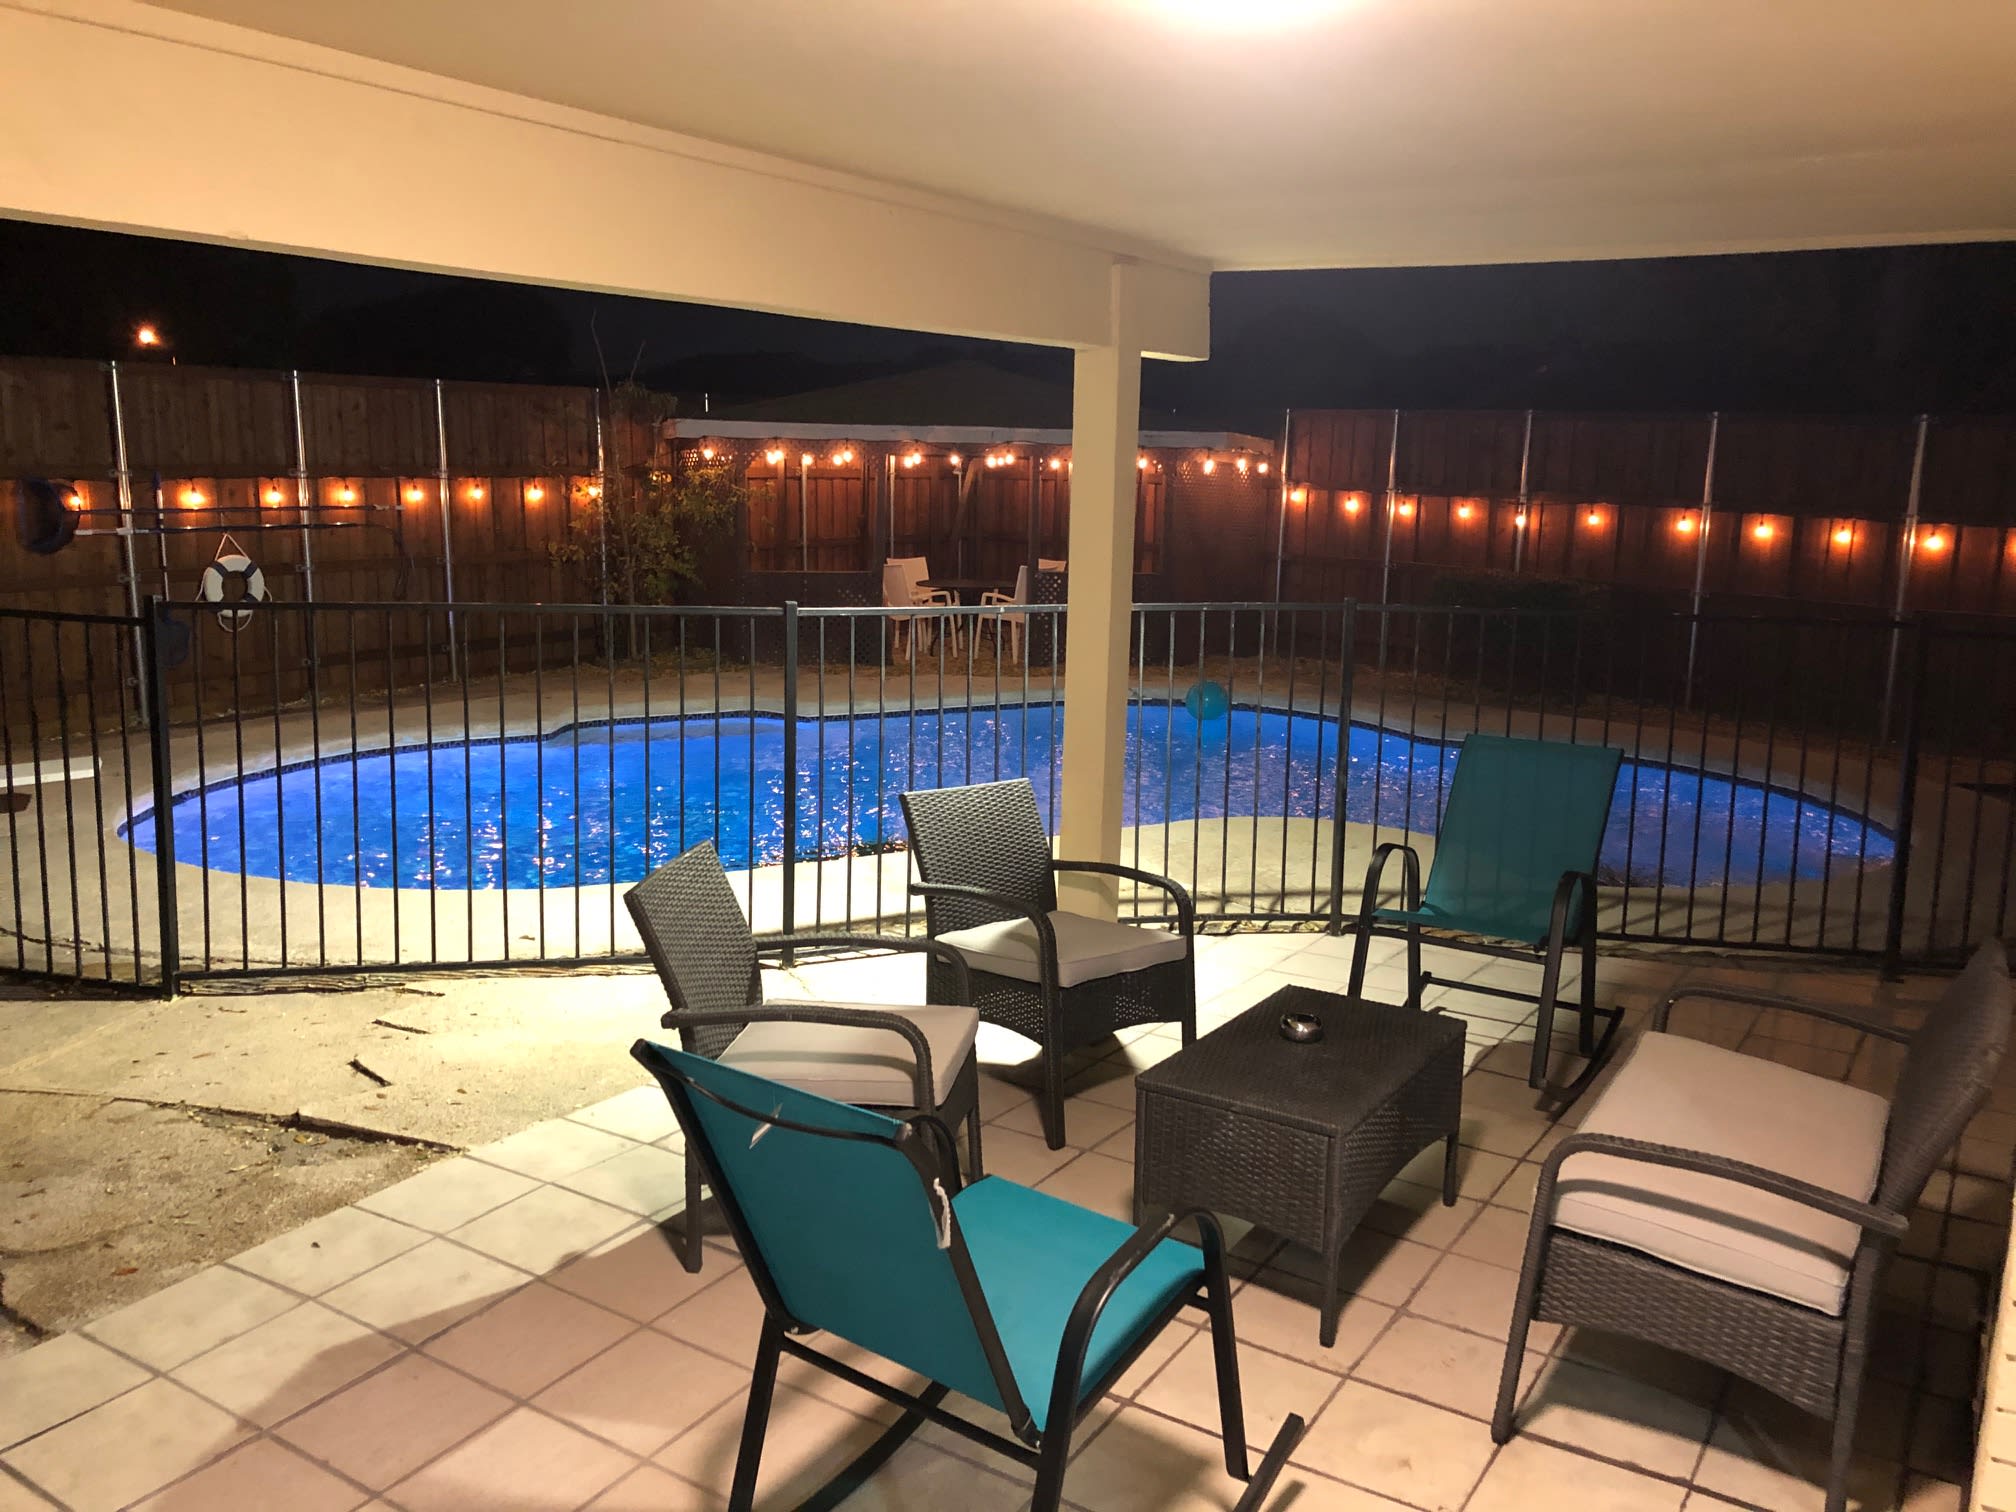 Best of Carrollton – Pool, Luxury, Patio and More!